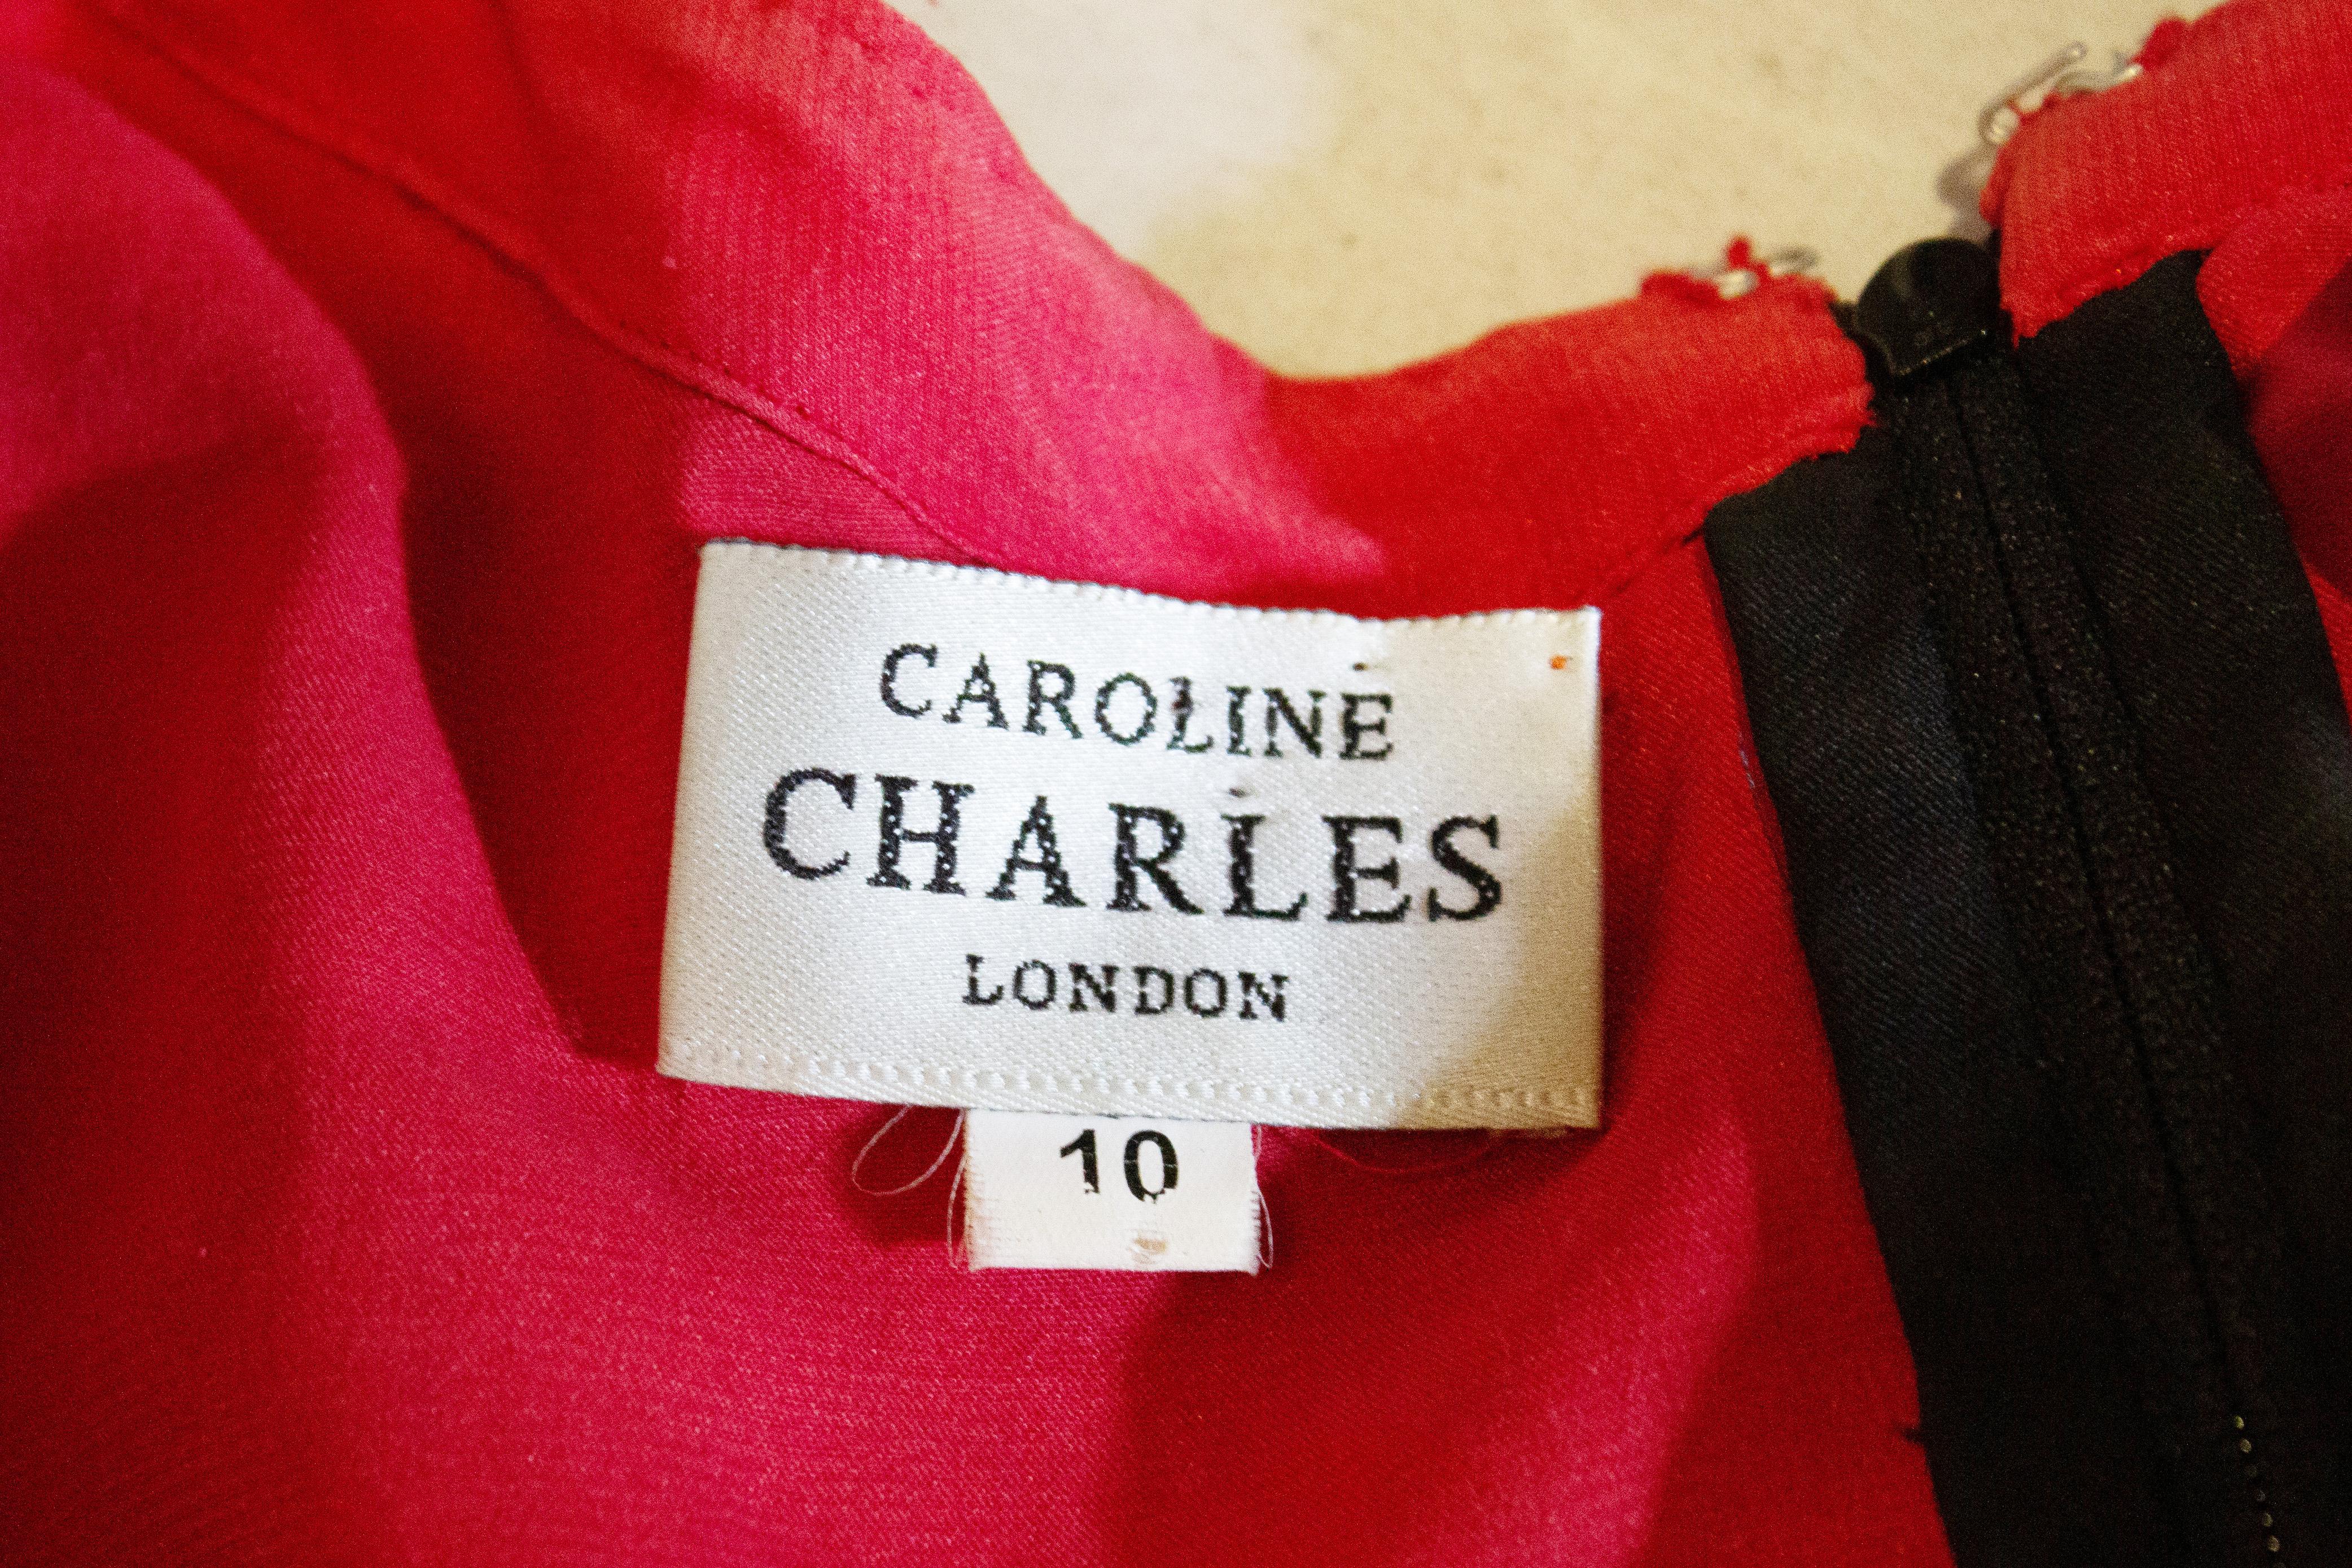 A stunning vintage evening top by Caroline Charles. The outer layer is in black lace with sequin and bead detail, and the lining layer is black and red. It has a sweetheart neckline and a v backline. with a zip opening and scalloped hem.